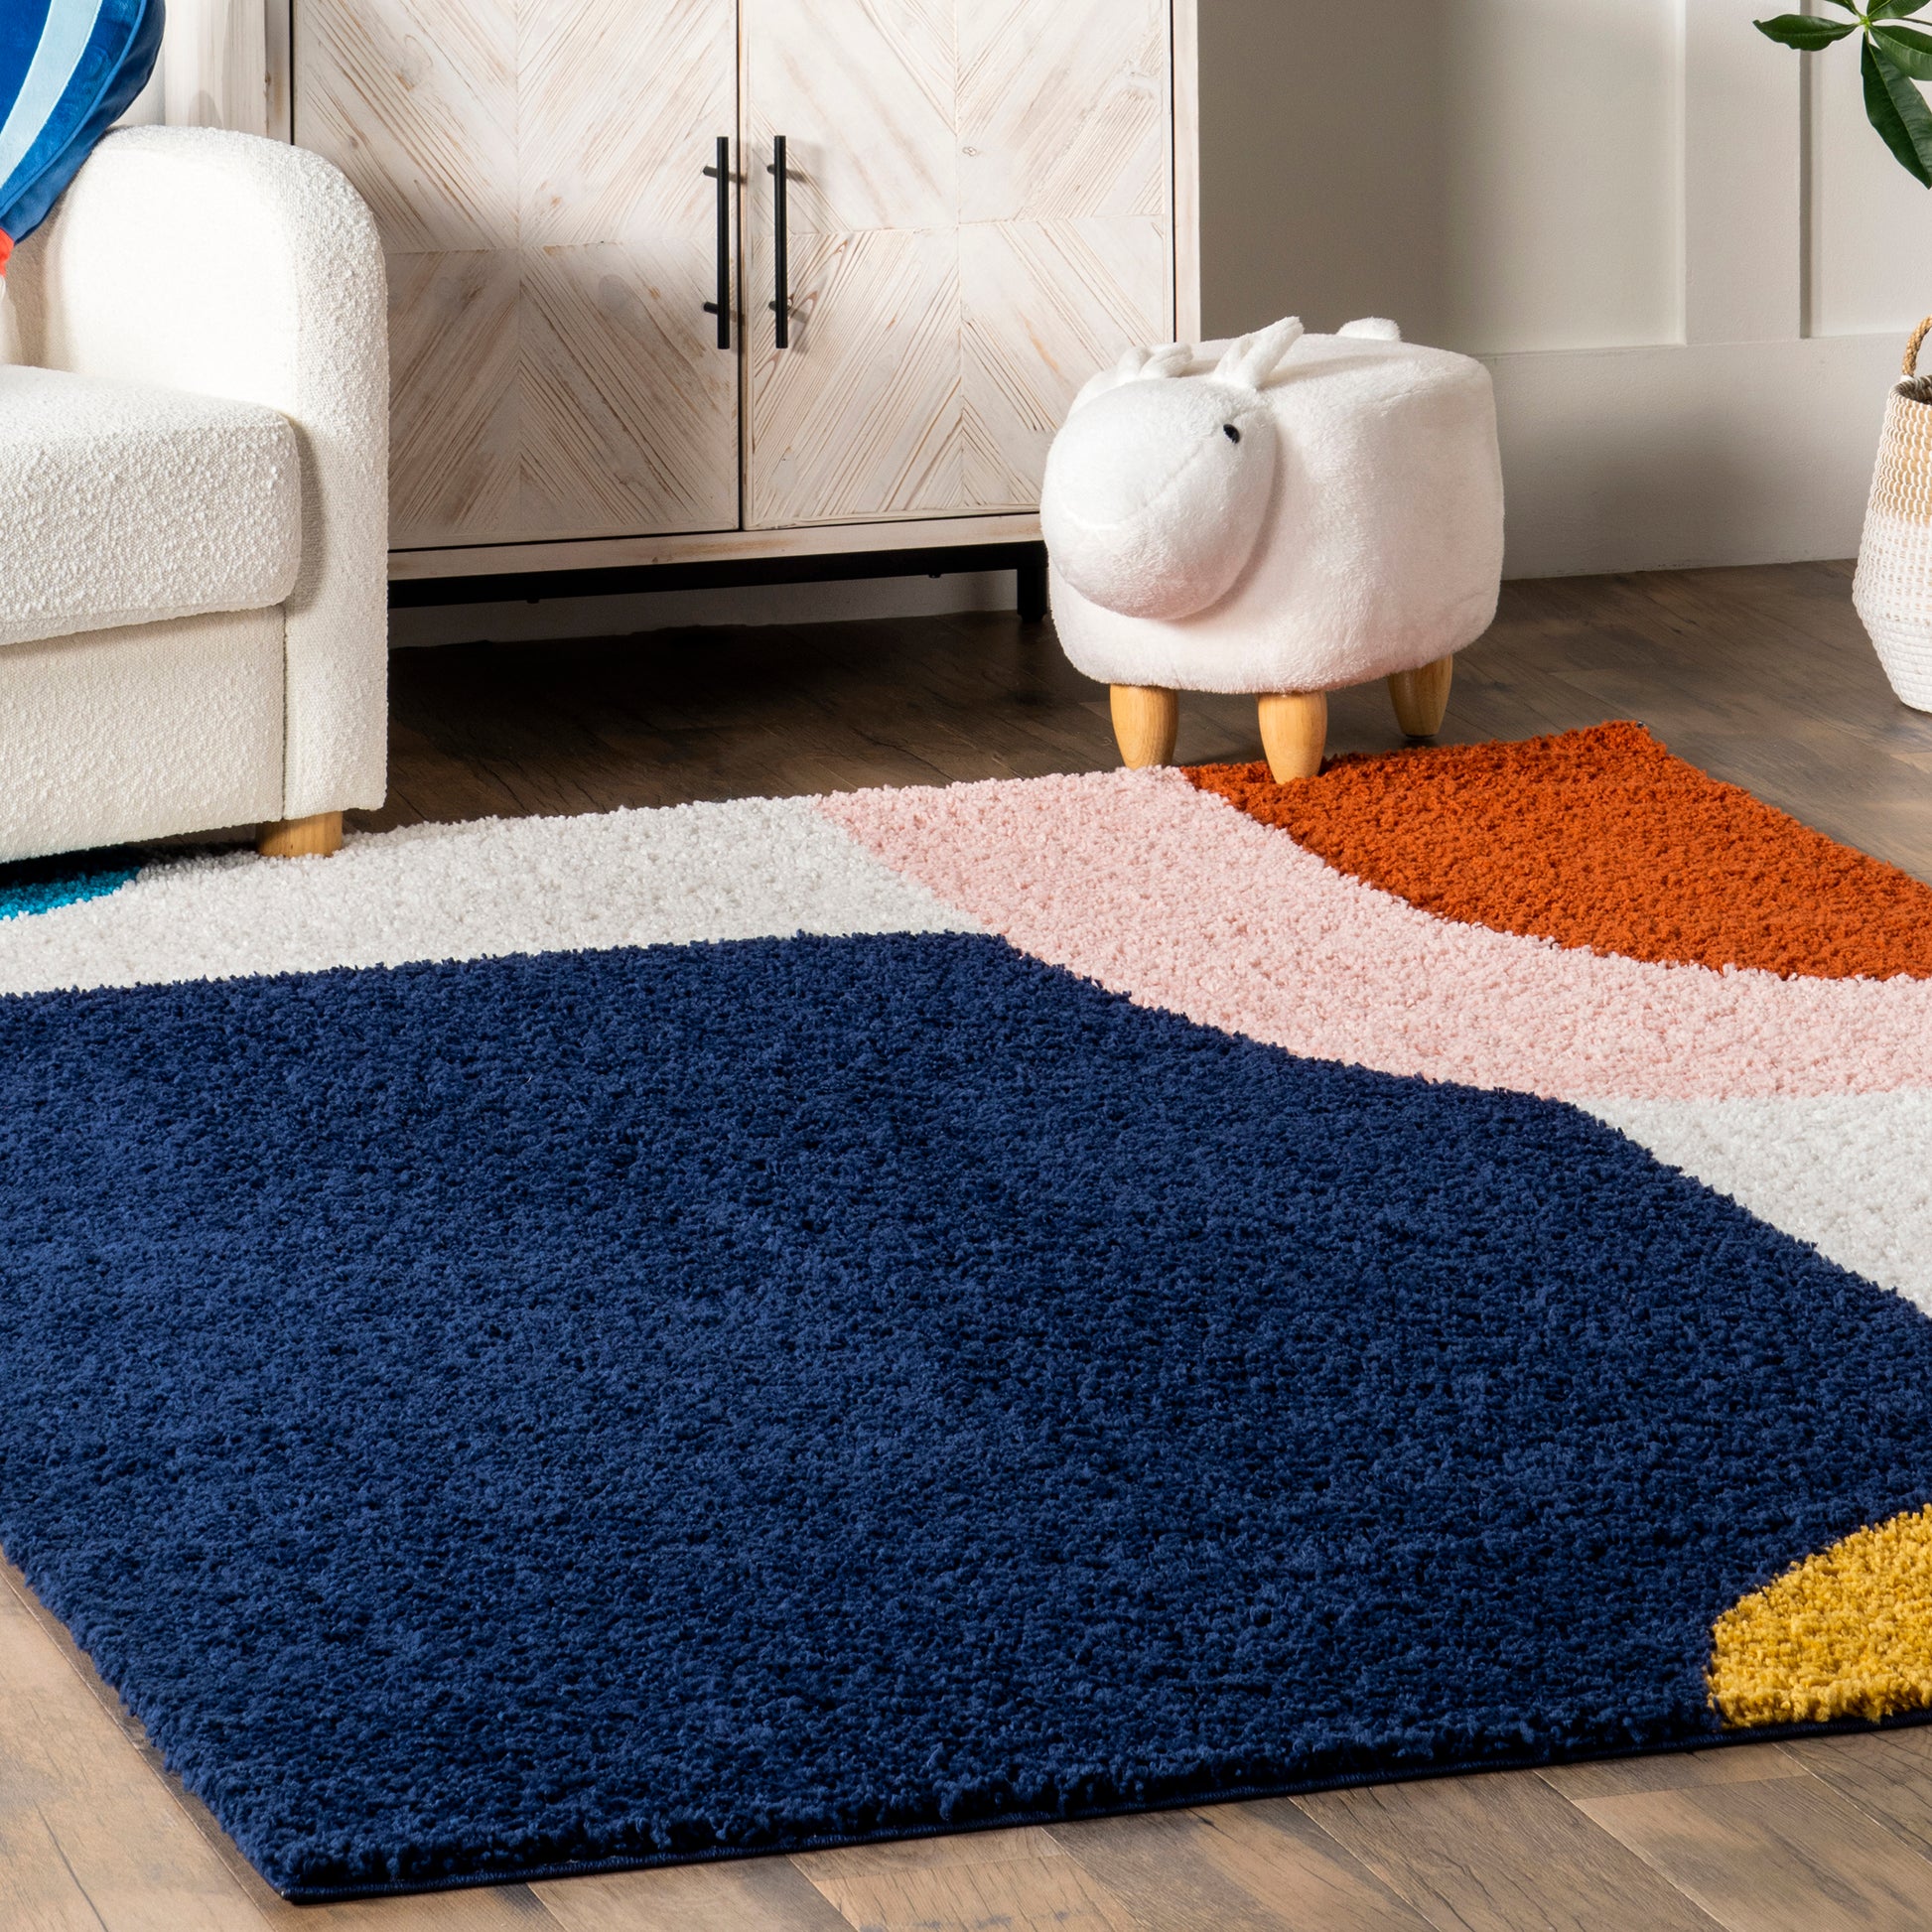 Nuloom Ellyn Abstract Shapes Ozez08A Blue Area Rug